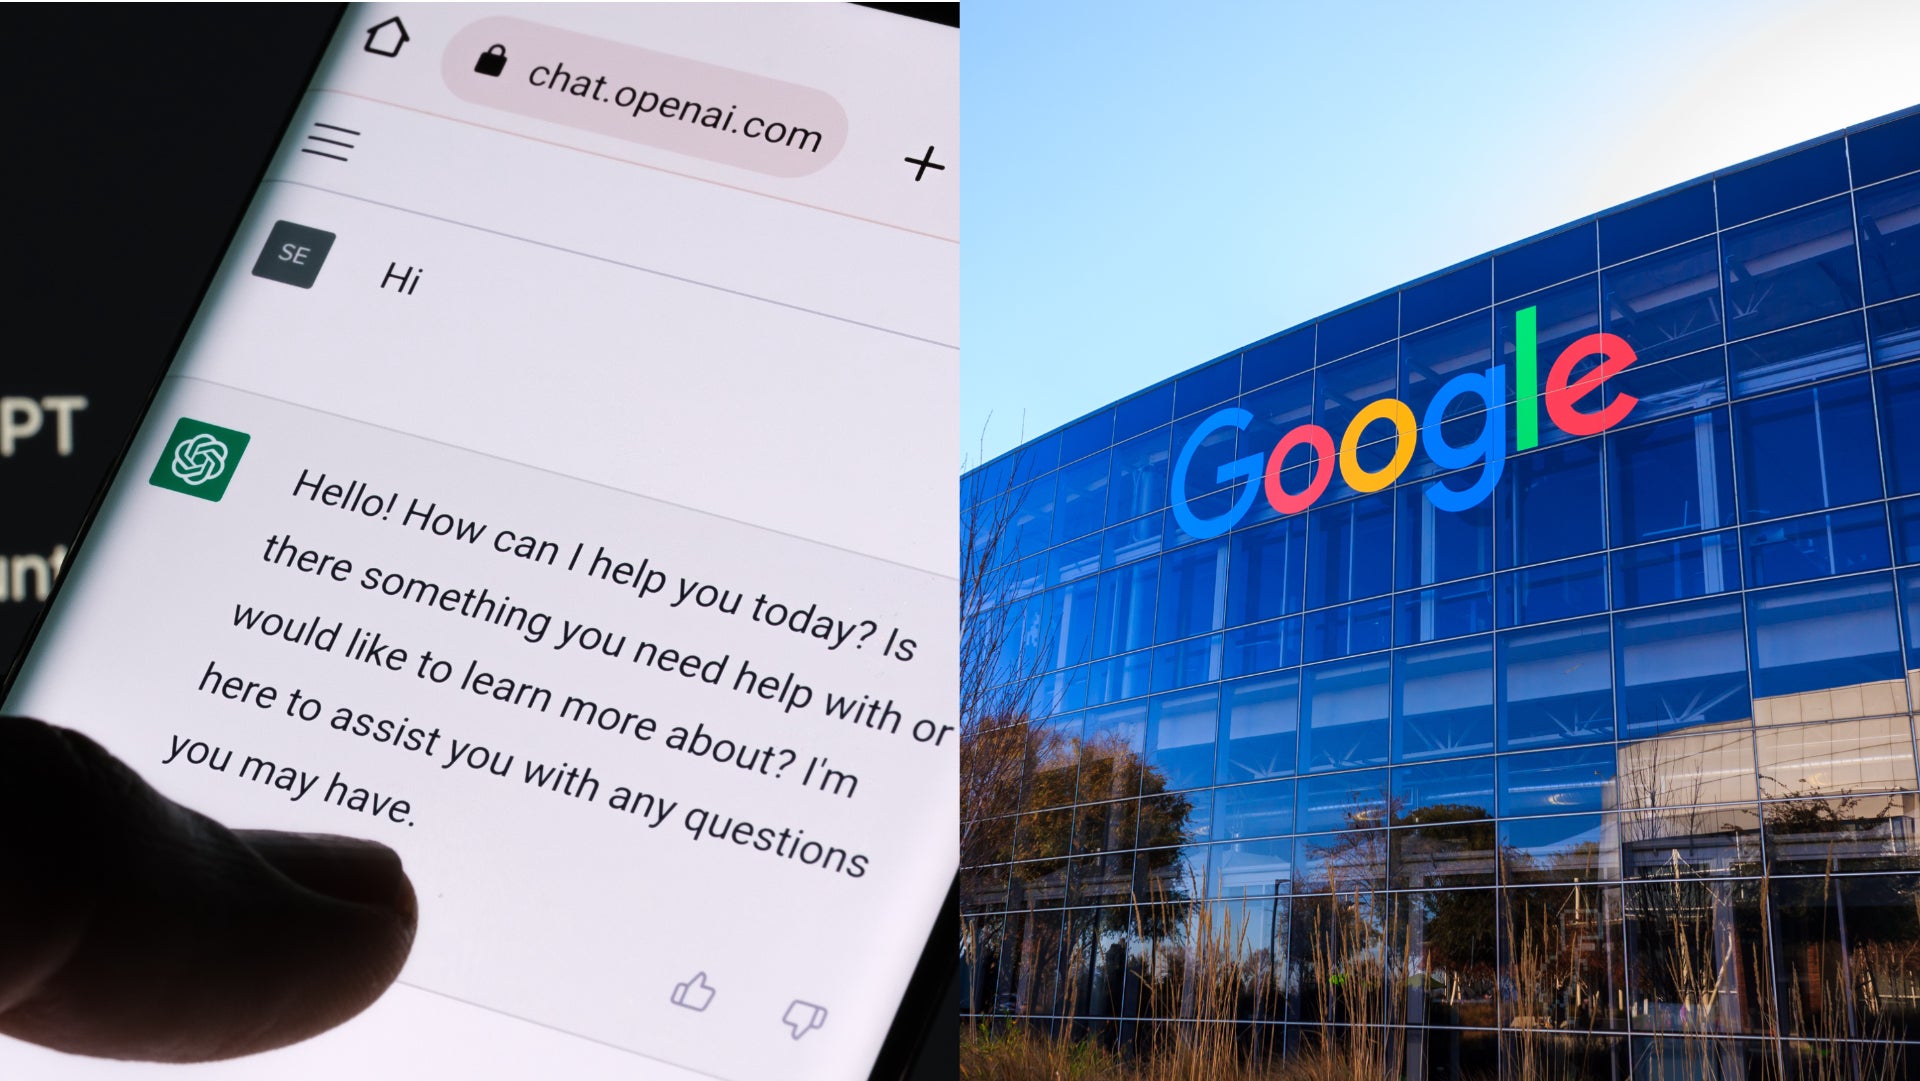 Google has been experimenting with artificial intelligence over the past few years, but the company has only recently been feeling the heat from competitor OpenAI. (Image: Ascannio, Shutterstock,Image: achinthamb, Shutterstock)